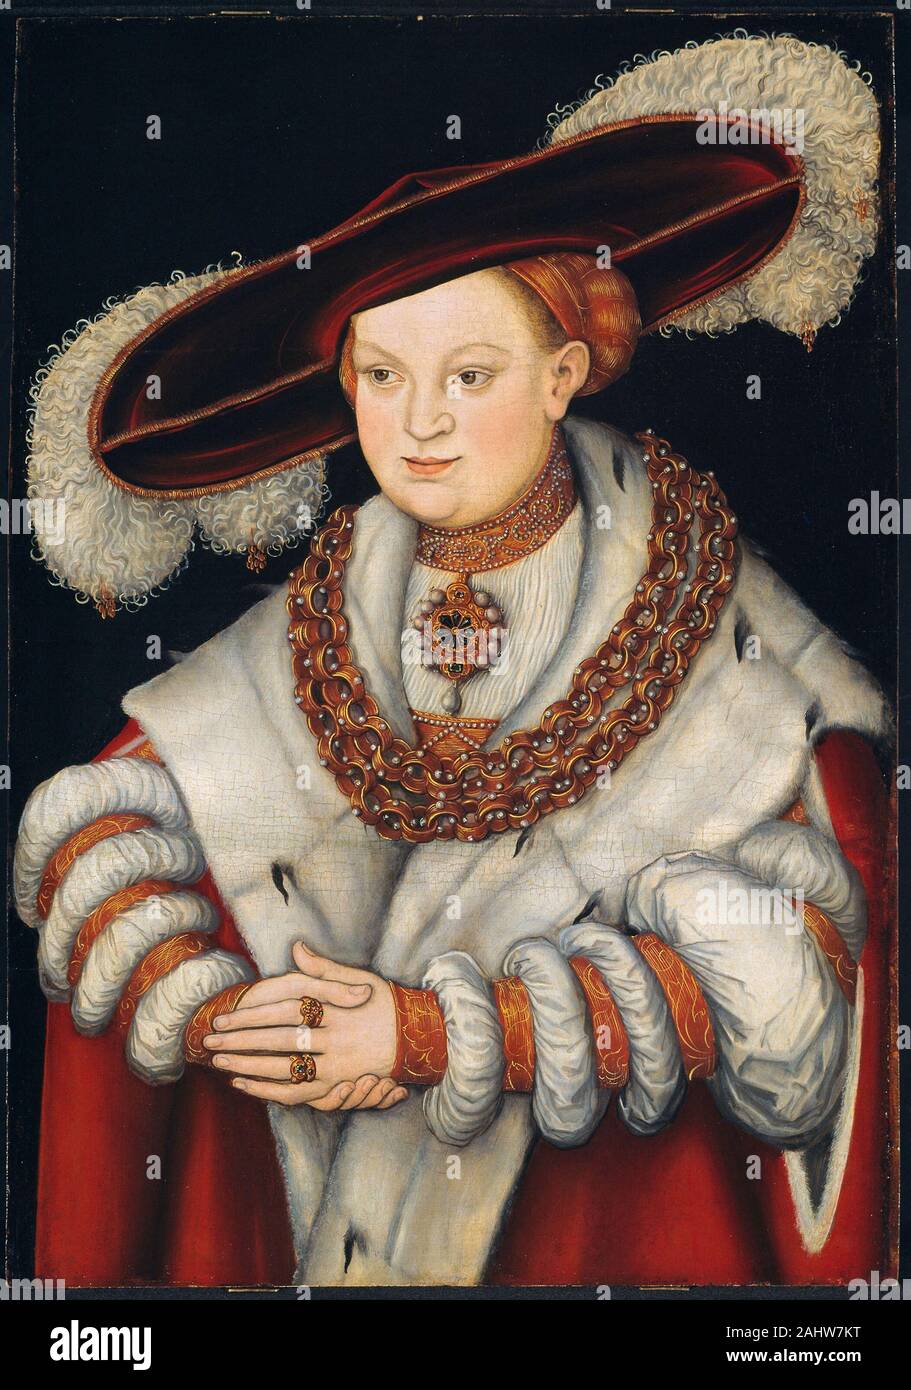 Lucas Cranach, the Elder. Portrait of Magdalena of Saxony, Wife of Elector Joachim II of Brandenburg. 1520–1540. Germany. Oil on panel As court painter to the electors of Saxony, Lucas Cranach the Elder developed a simplified portrait style that catered to his patrons’ concern with dynastic continuity and princely status. His portraits of princes present a legible, if not always flattering, rendering of his sitter’s features and richly patterned costumes. The Saxon princess depicted her married in to the Brandenburg branch of the Hohenzollern family, and her descendants became kings of Prussia Stock Photo